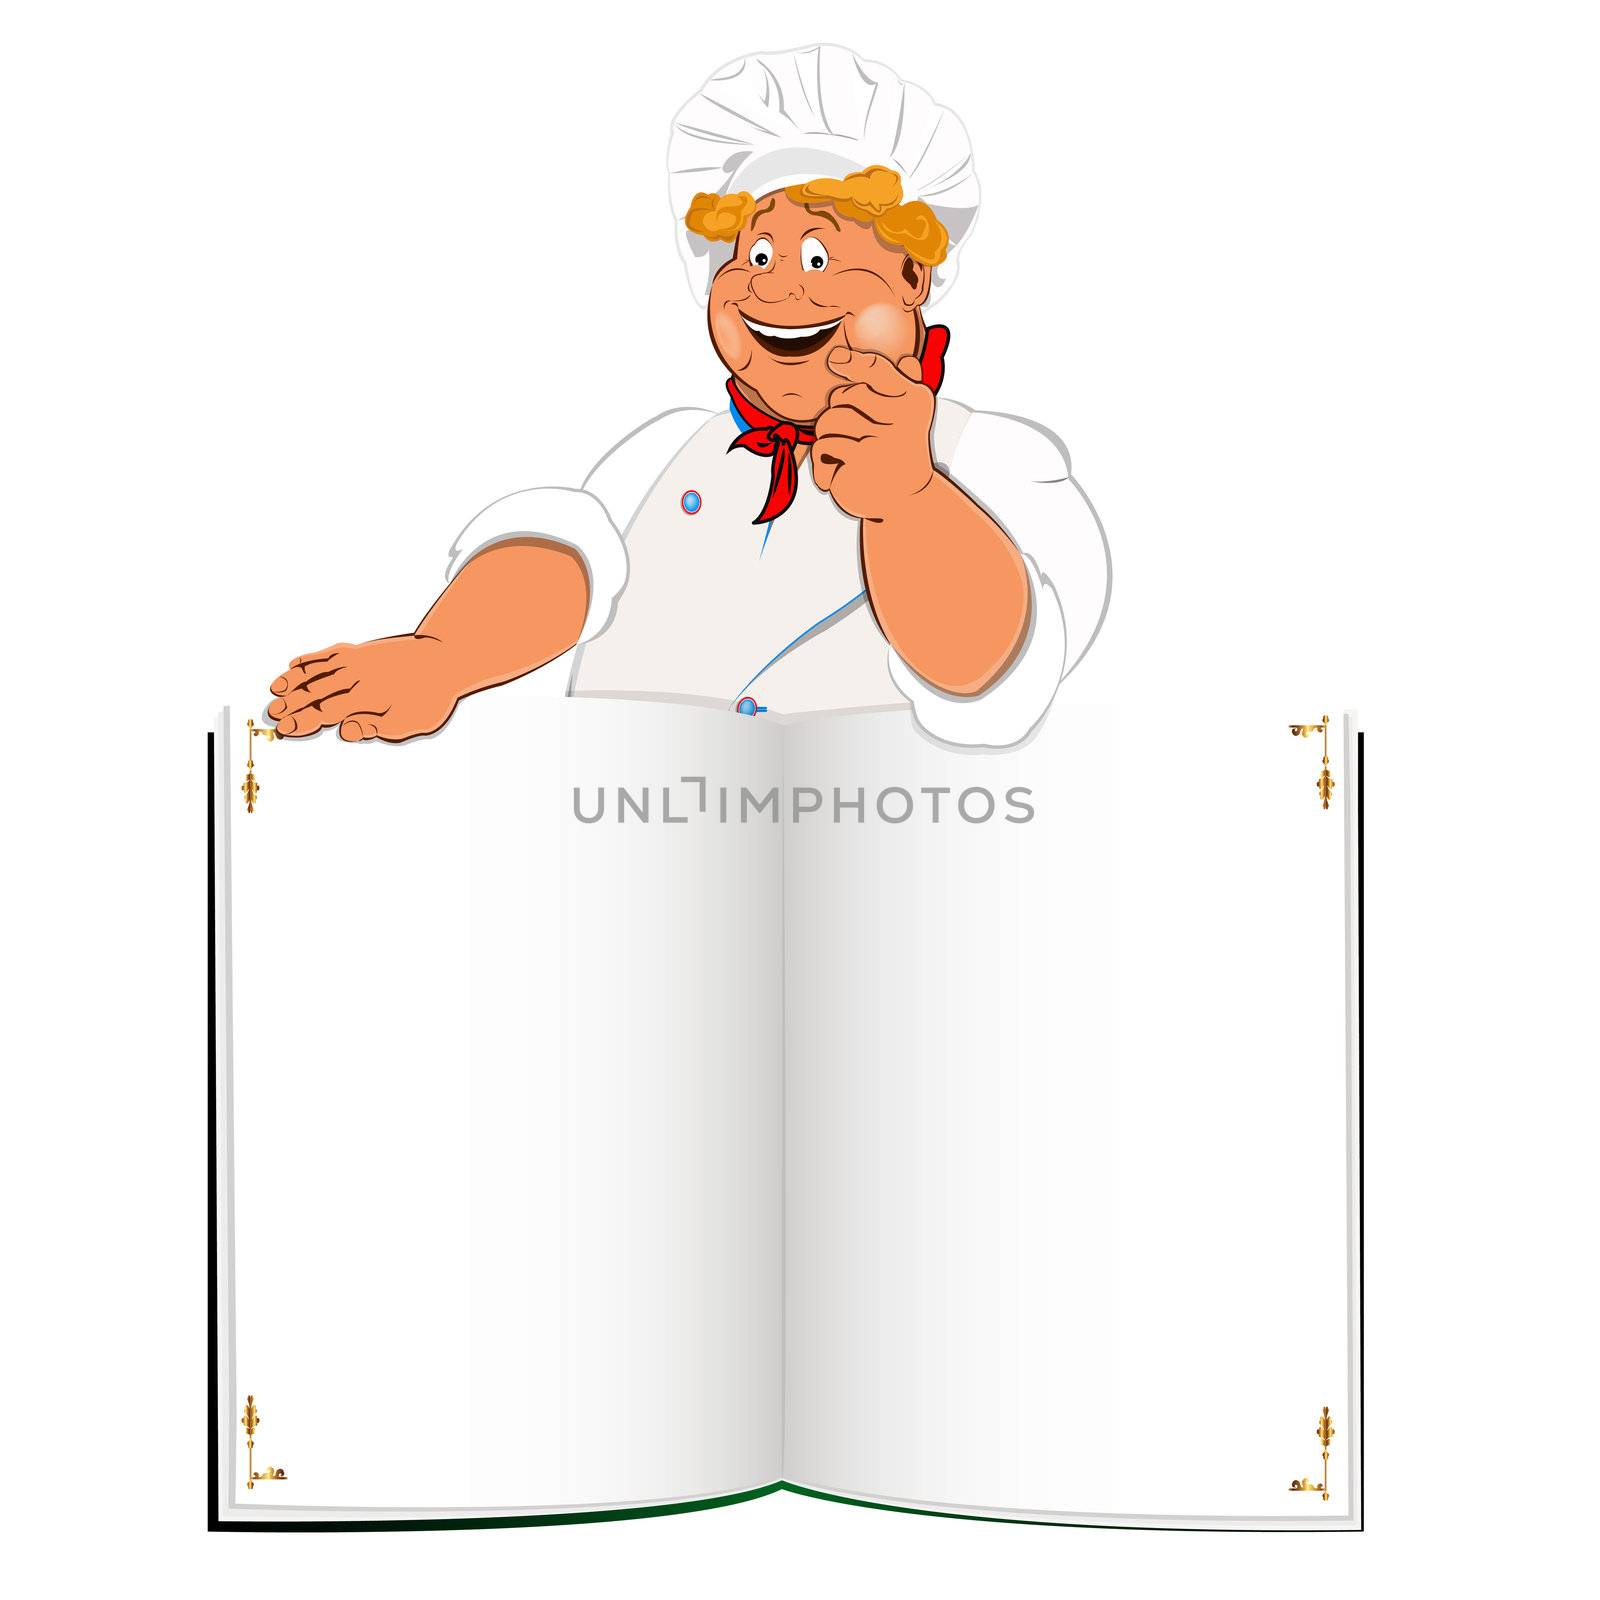 Funny Chef and book menu for Gourmet